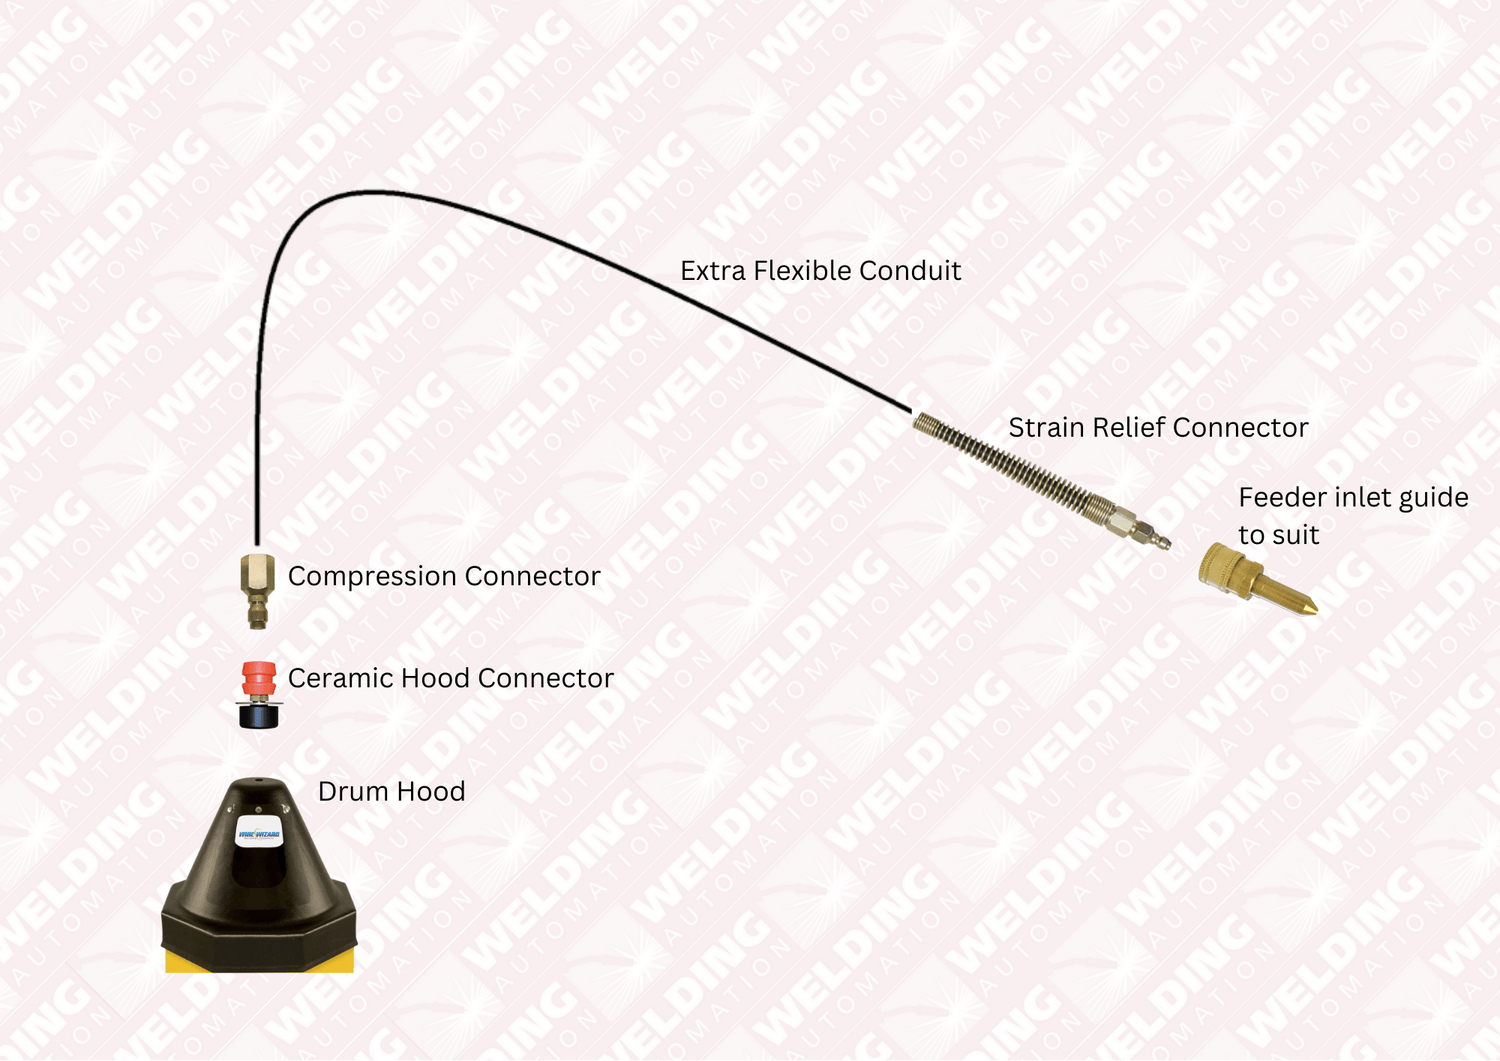 Wire Wizard components from Drum to Feeder